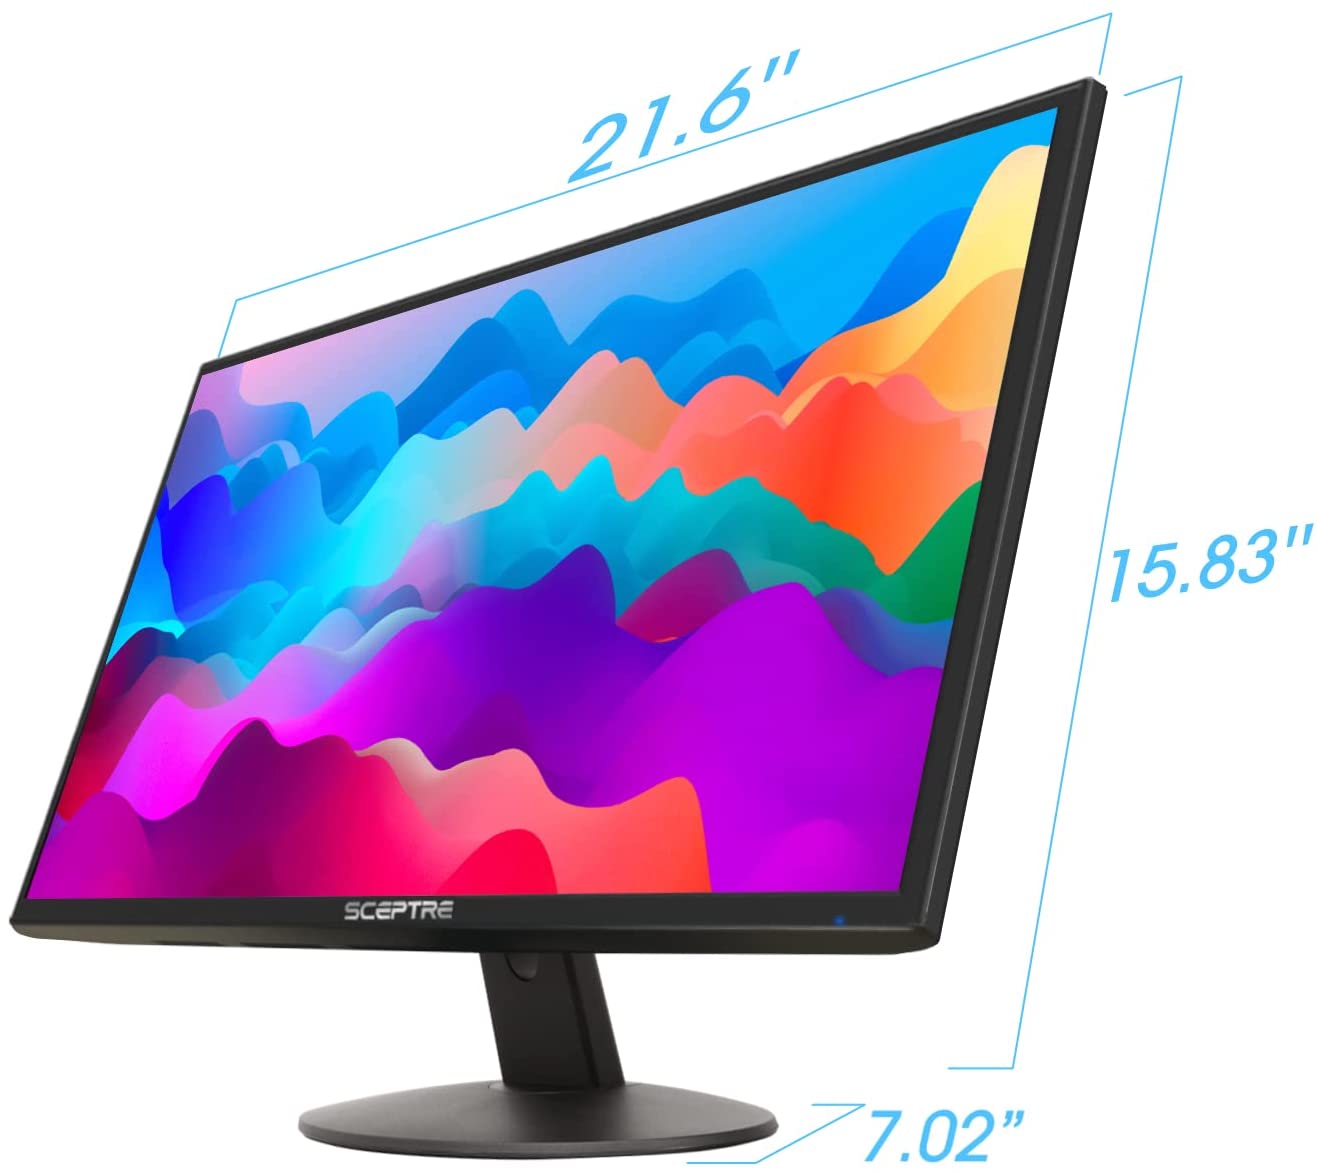 Why Sceptre 24-inch LED monitor is a great deal?